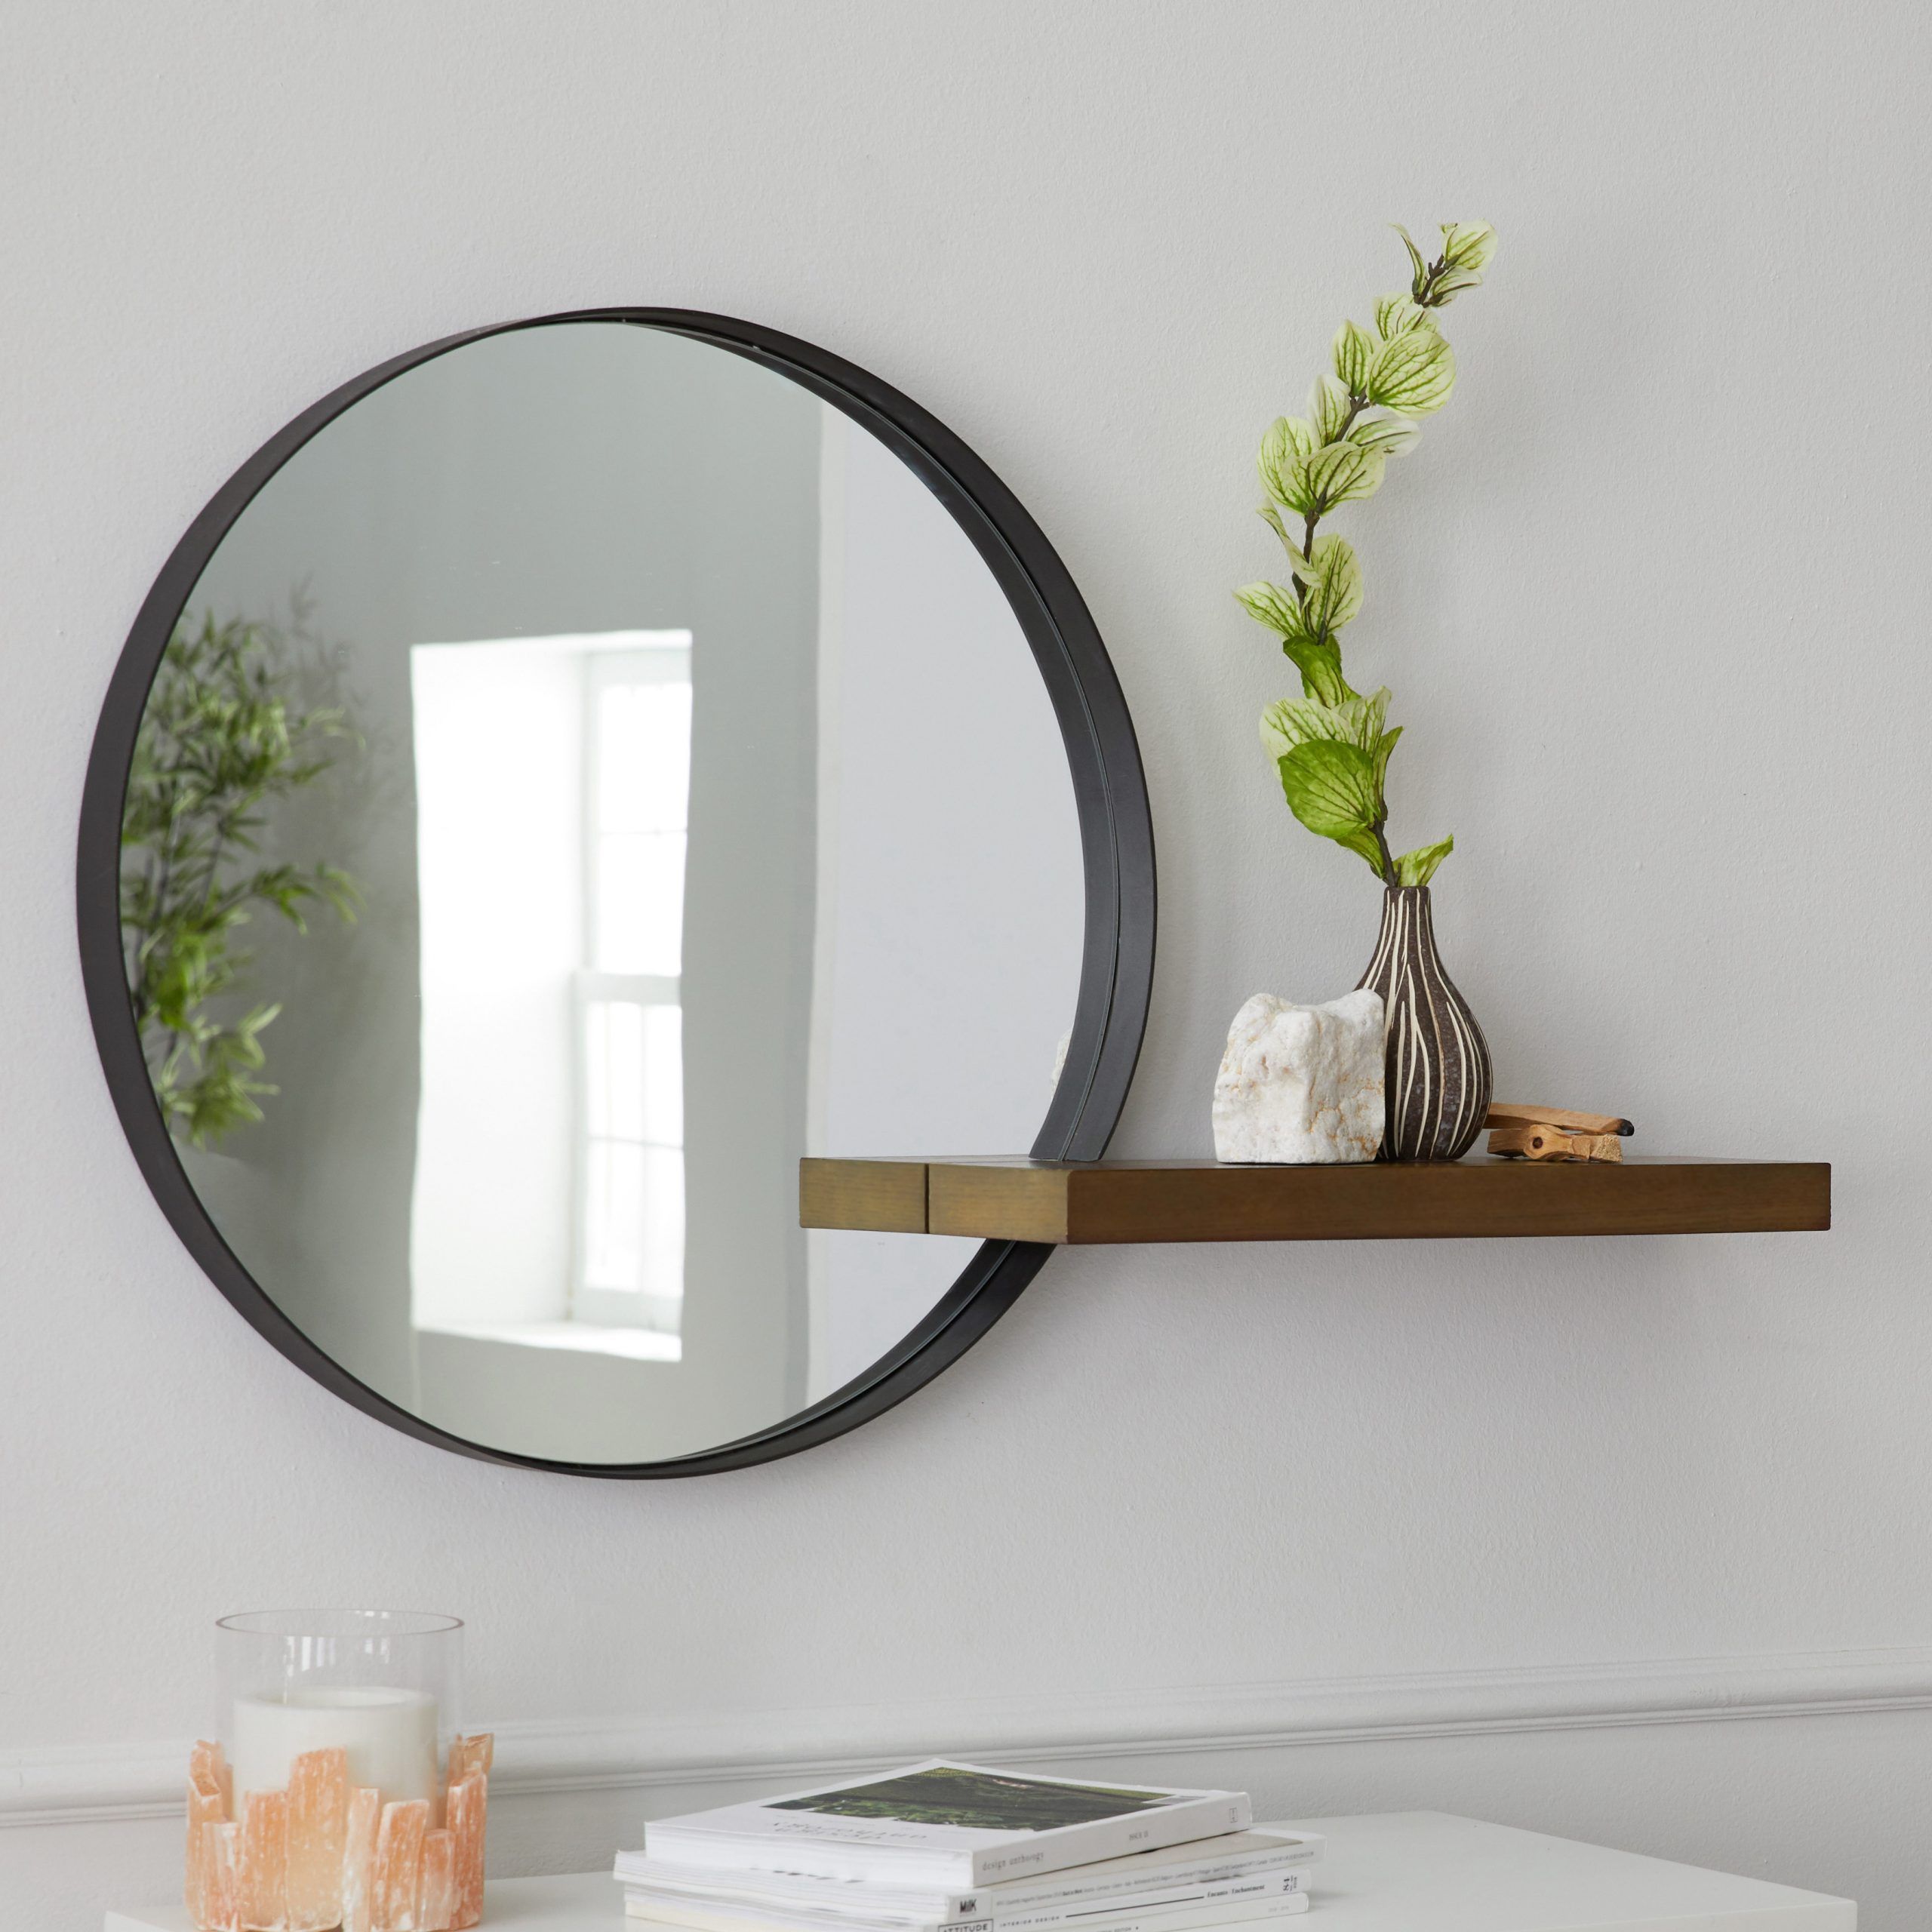 Modrn Naturals Metal Framed Round Decorative Wall Mirror With Wood Within Woven Metal Round Wall Mirrors (View 11 of 15)